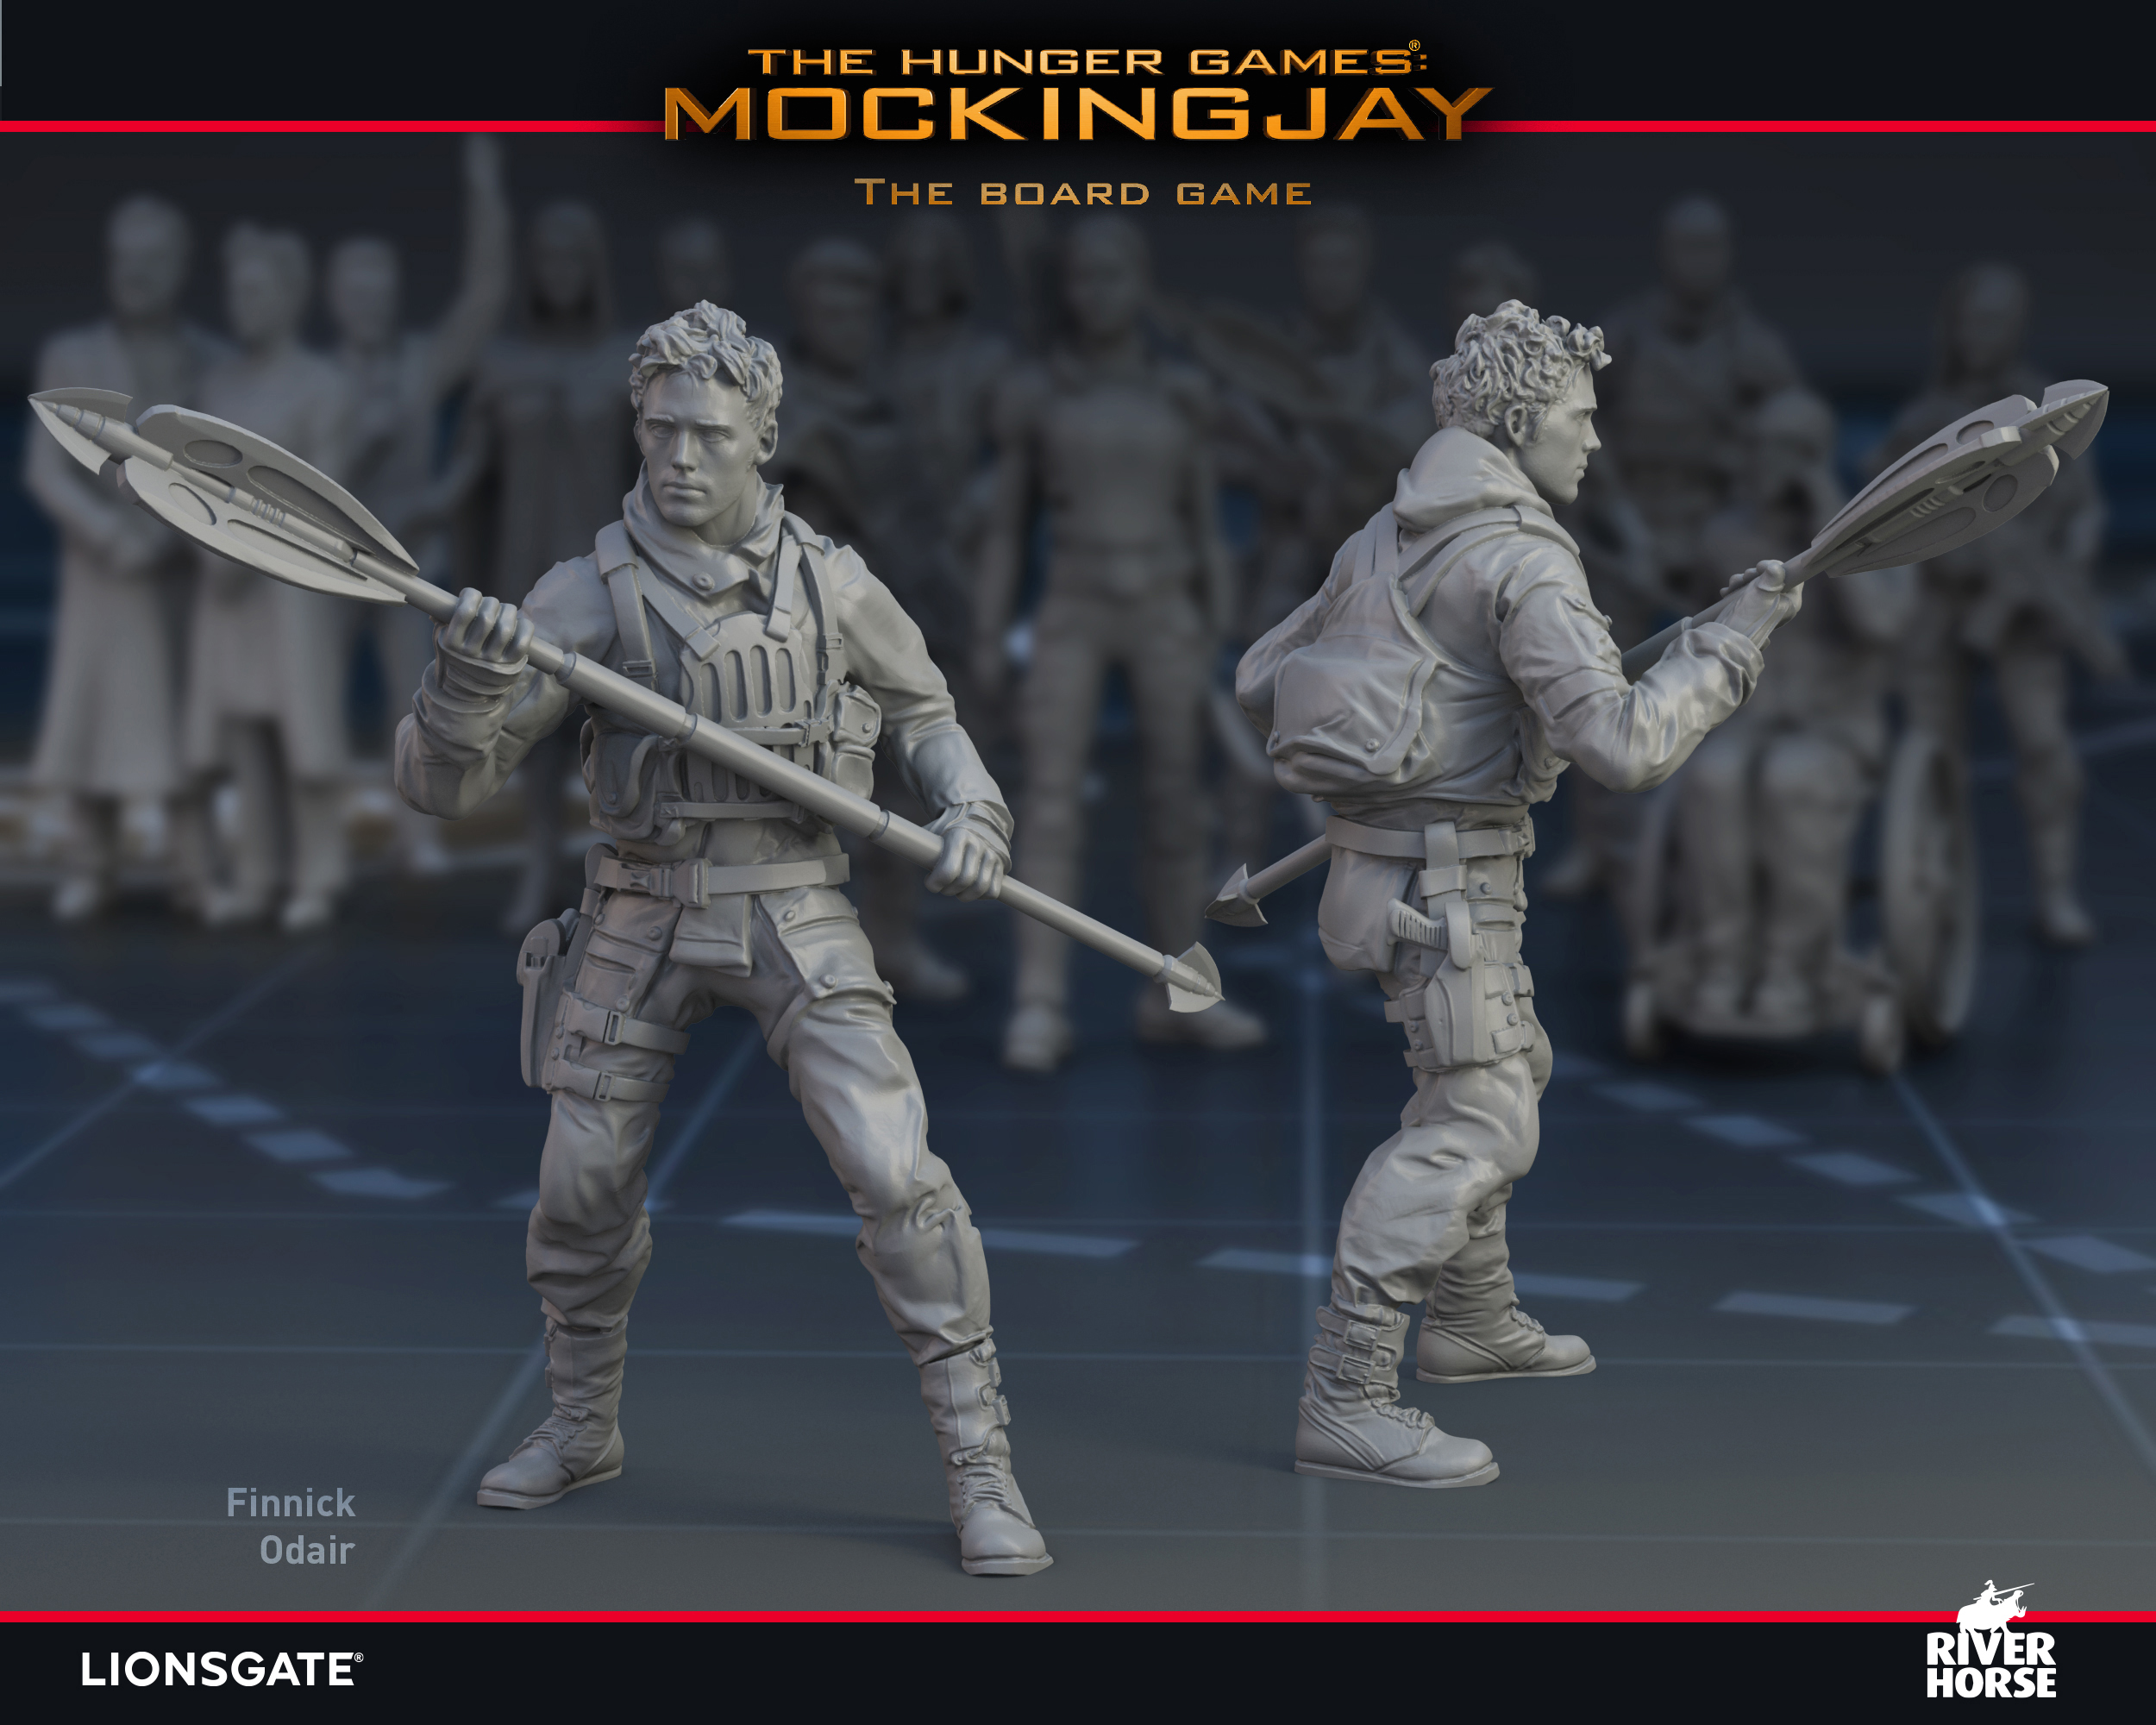 Render of Finnick for The Hunger Games: Mockingjay - The Board Game by River Horse